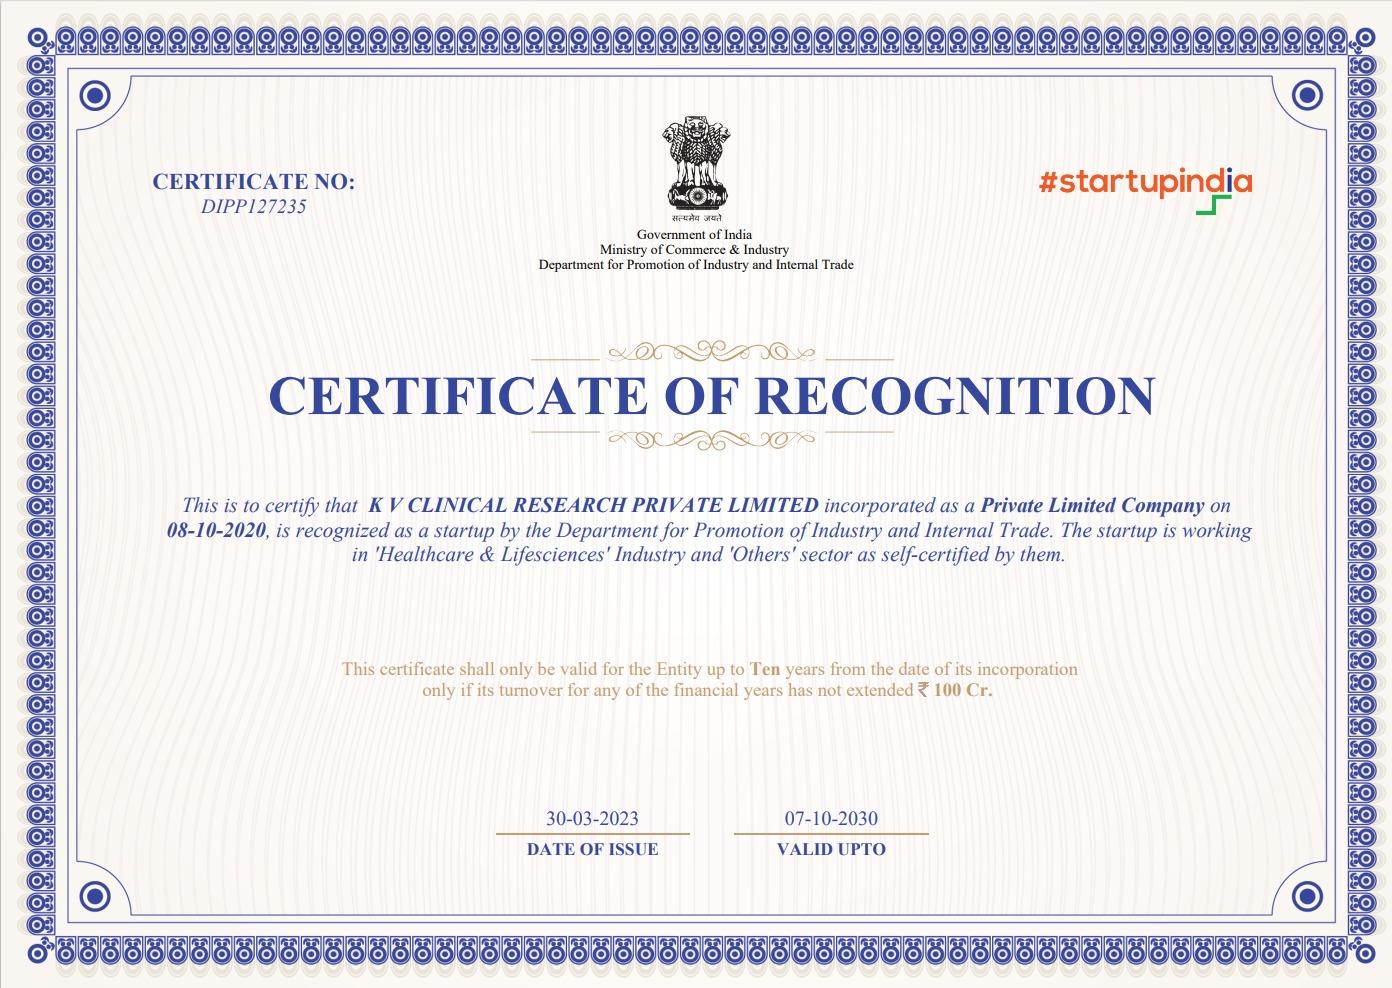 startup India certificate to KV Clinical Research